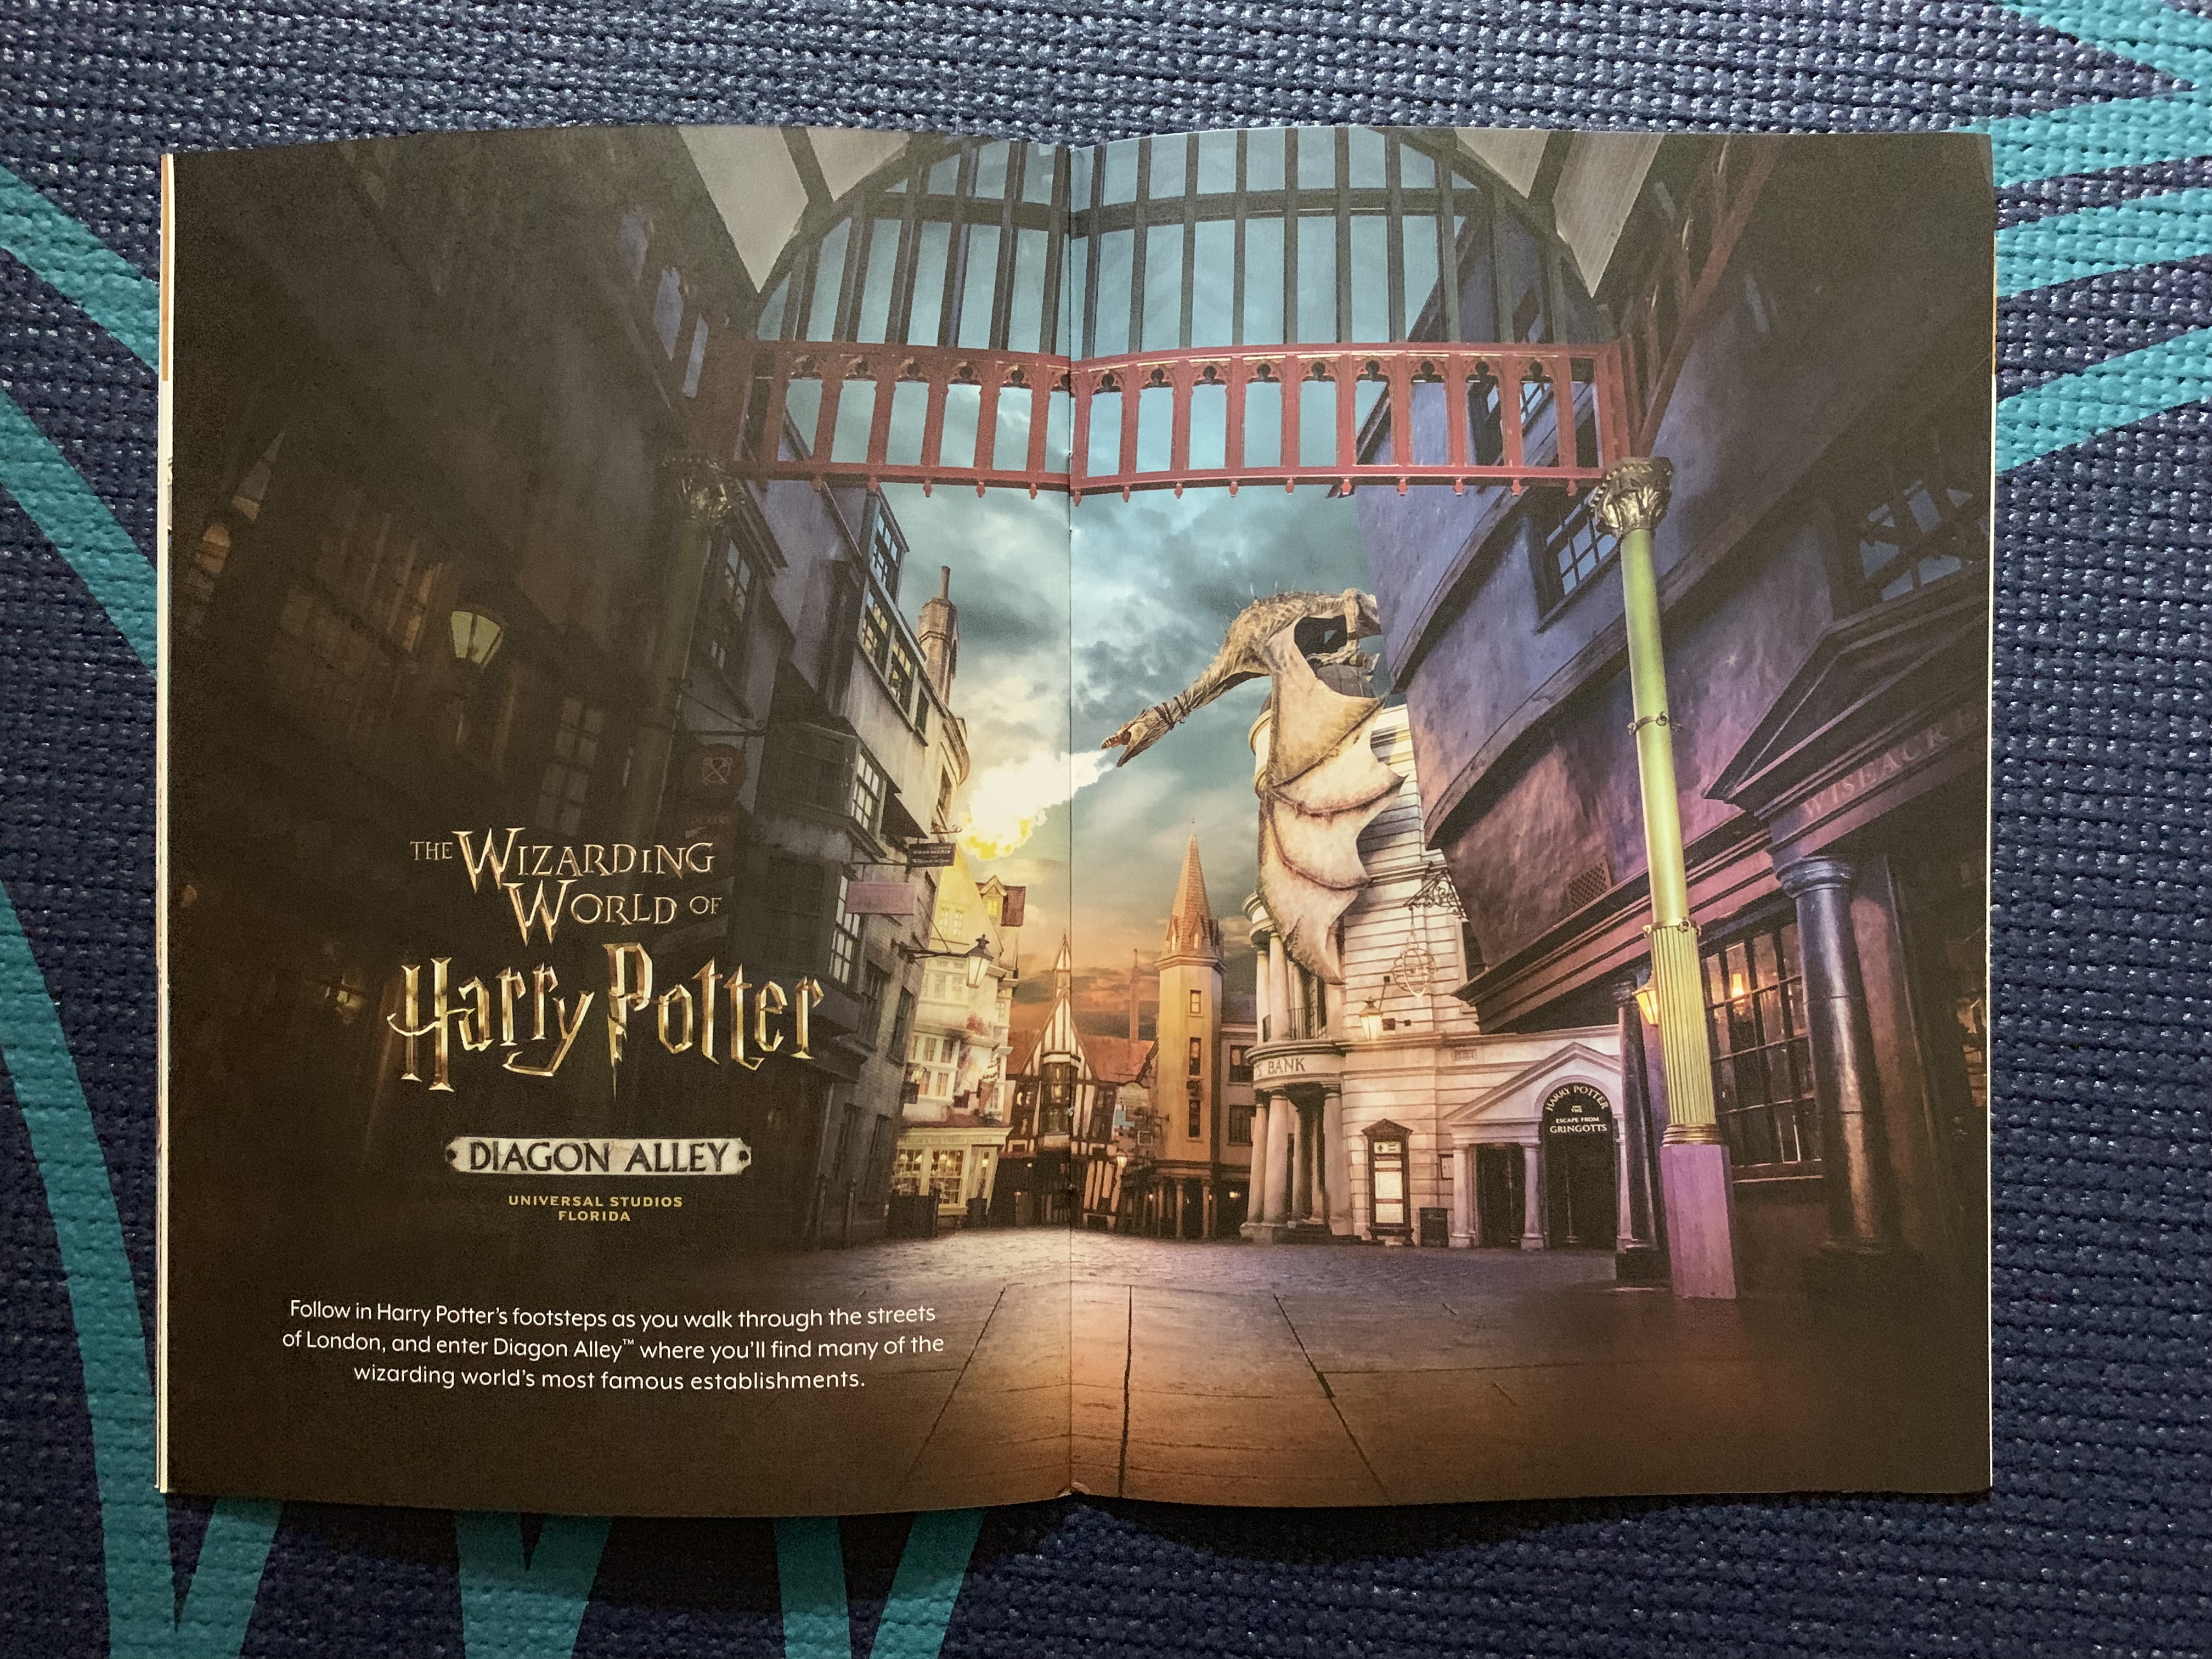 Your “Wizarding World of Harry Potter Exclusive Vacation Package” will include a special travel guide. Visible are pages describing Diagon Alley in Islands of Adventure.